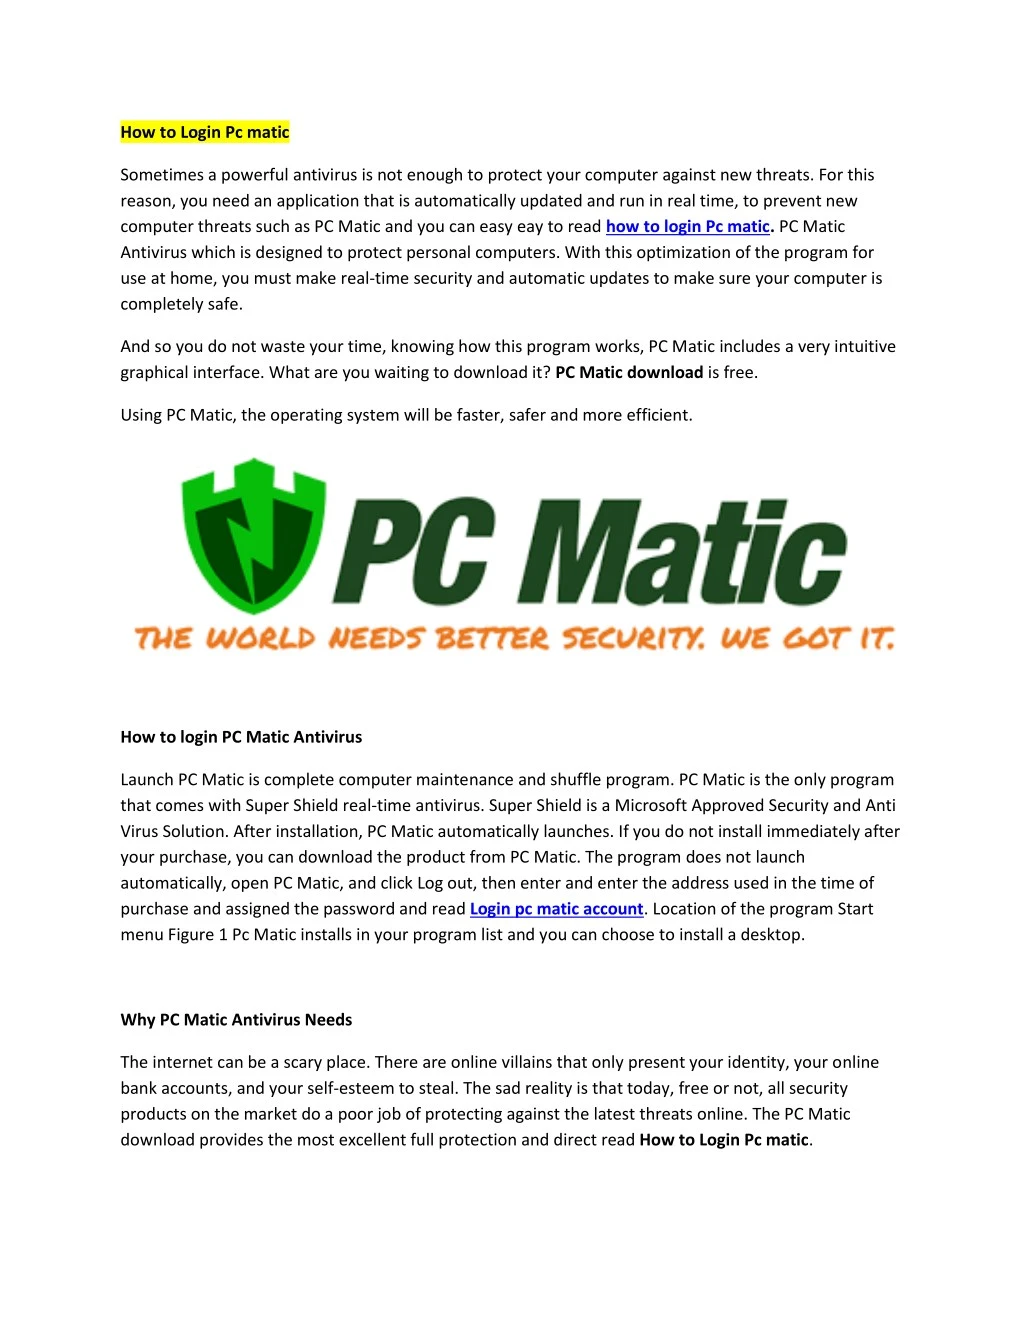 how to login pc matic